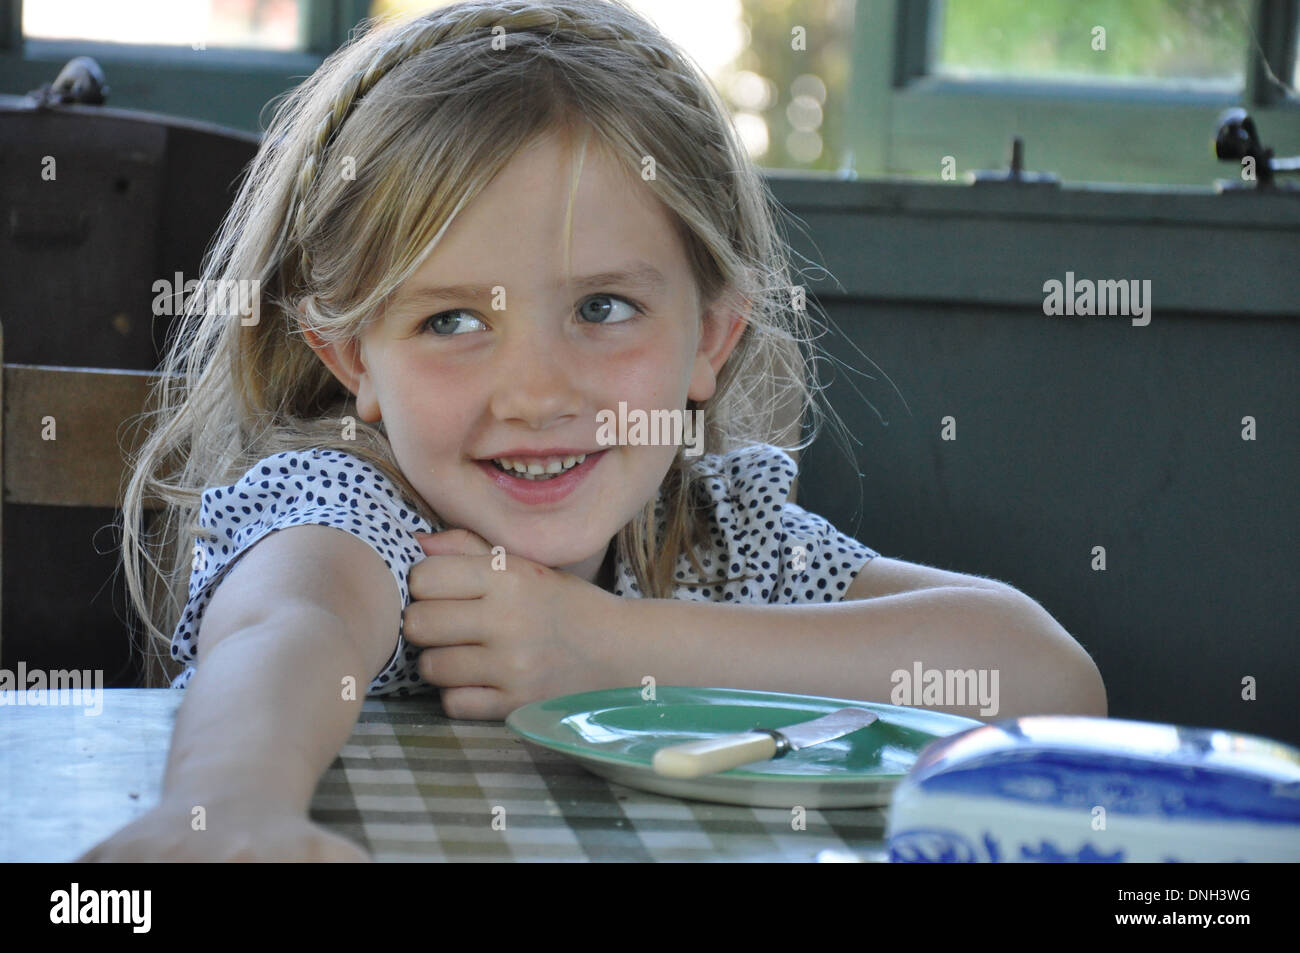 portrait of pretty blonde smiling girl aged 6 to 10 years Stock Photo